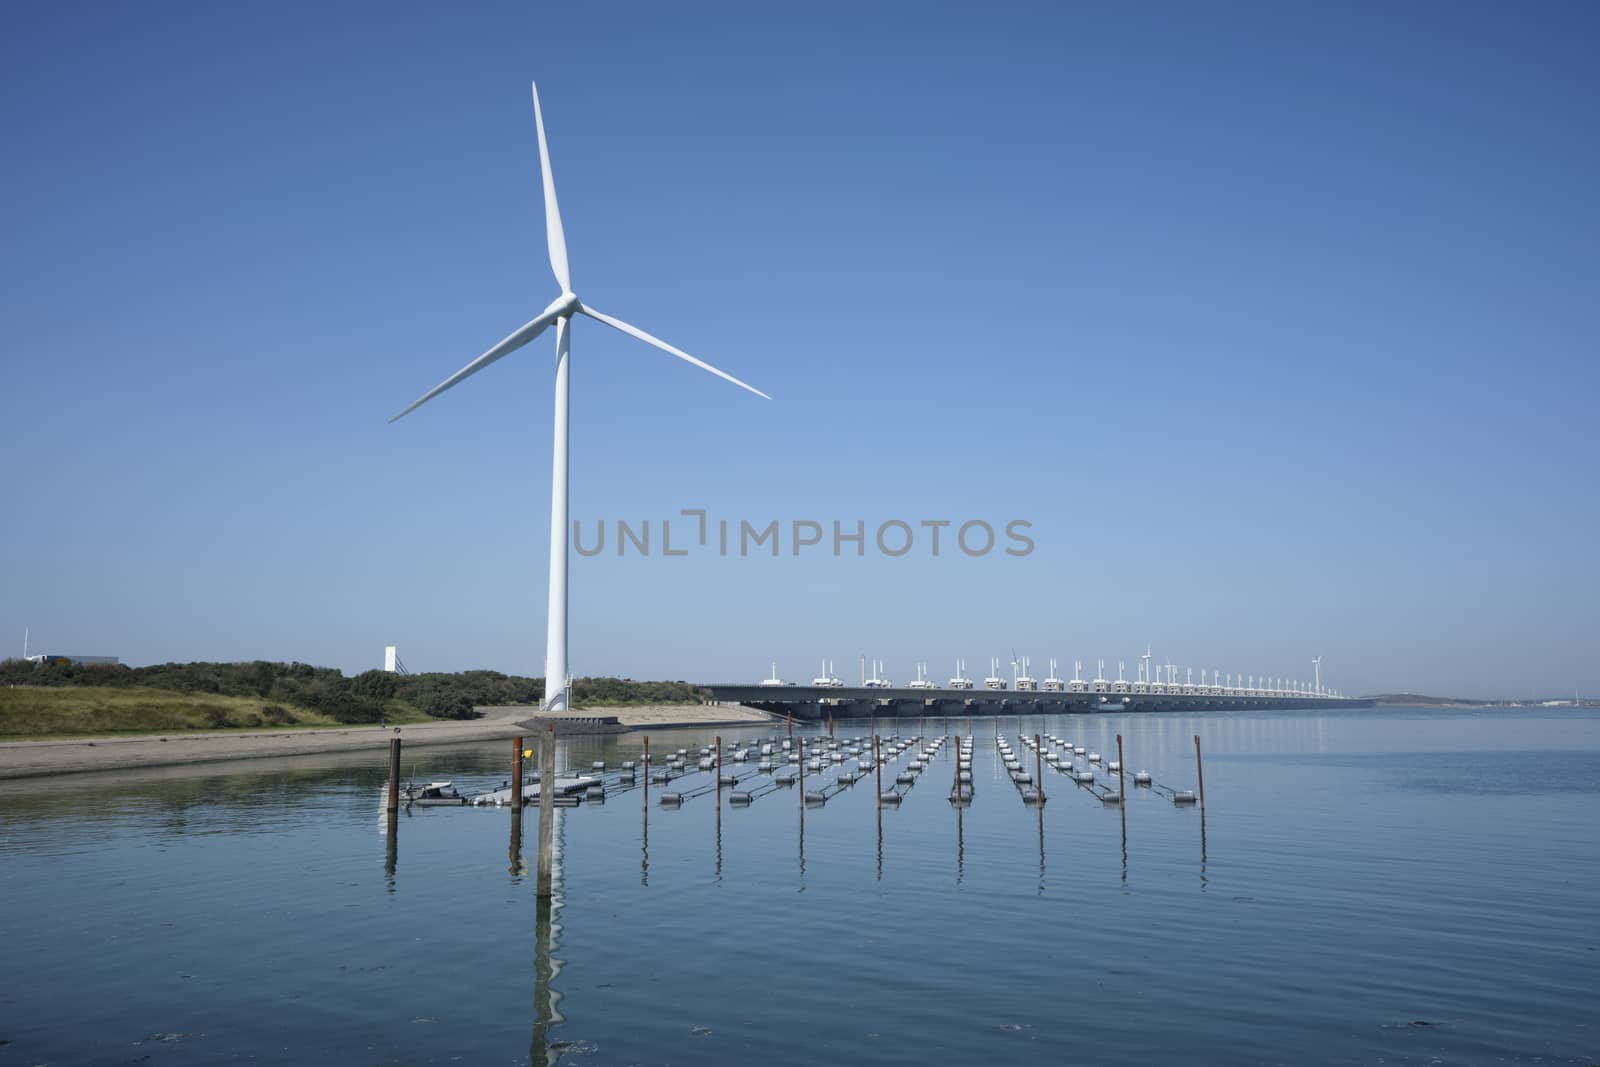 the zeelandbrug deltaworks in holland at the Oosterschelde river to protect holland form high sea level, this is near the dutch museum neeltje jans with windmills as background